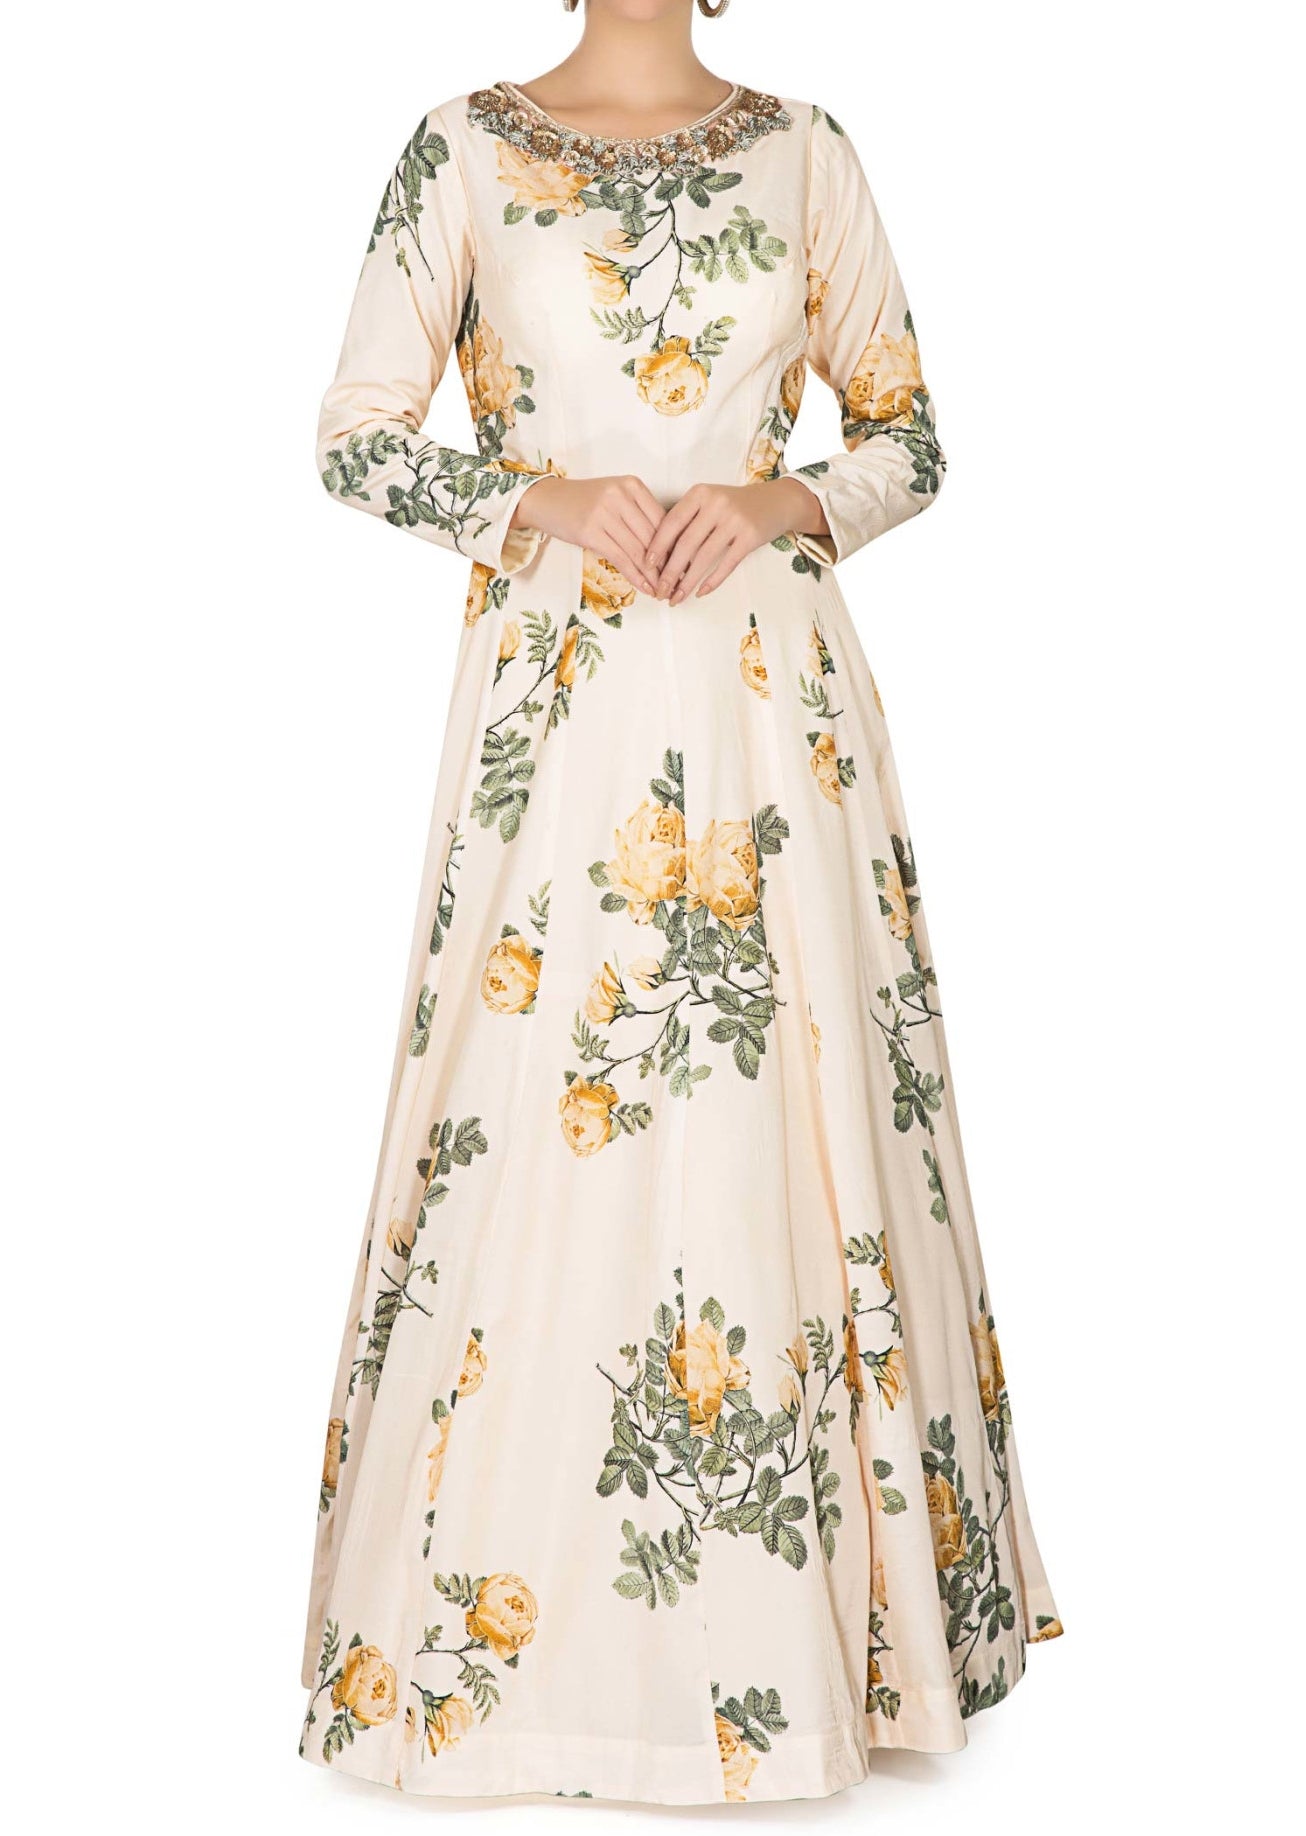 Vanilla cream anarkali gown - Indian Clothing in Denver, CO, Aurora, CO, Boulder, CO, Fort Collins, CO, Colorado Springs, CO, Parker, CO, Highlands Ranch, CO, Cherry Creek, CO, Centennial, CO, and Longmont, CO. Nationwide shipping USA - India Fashion X